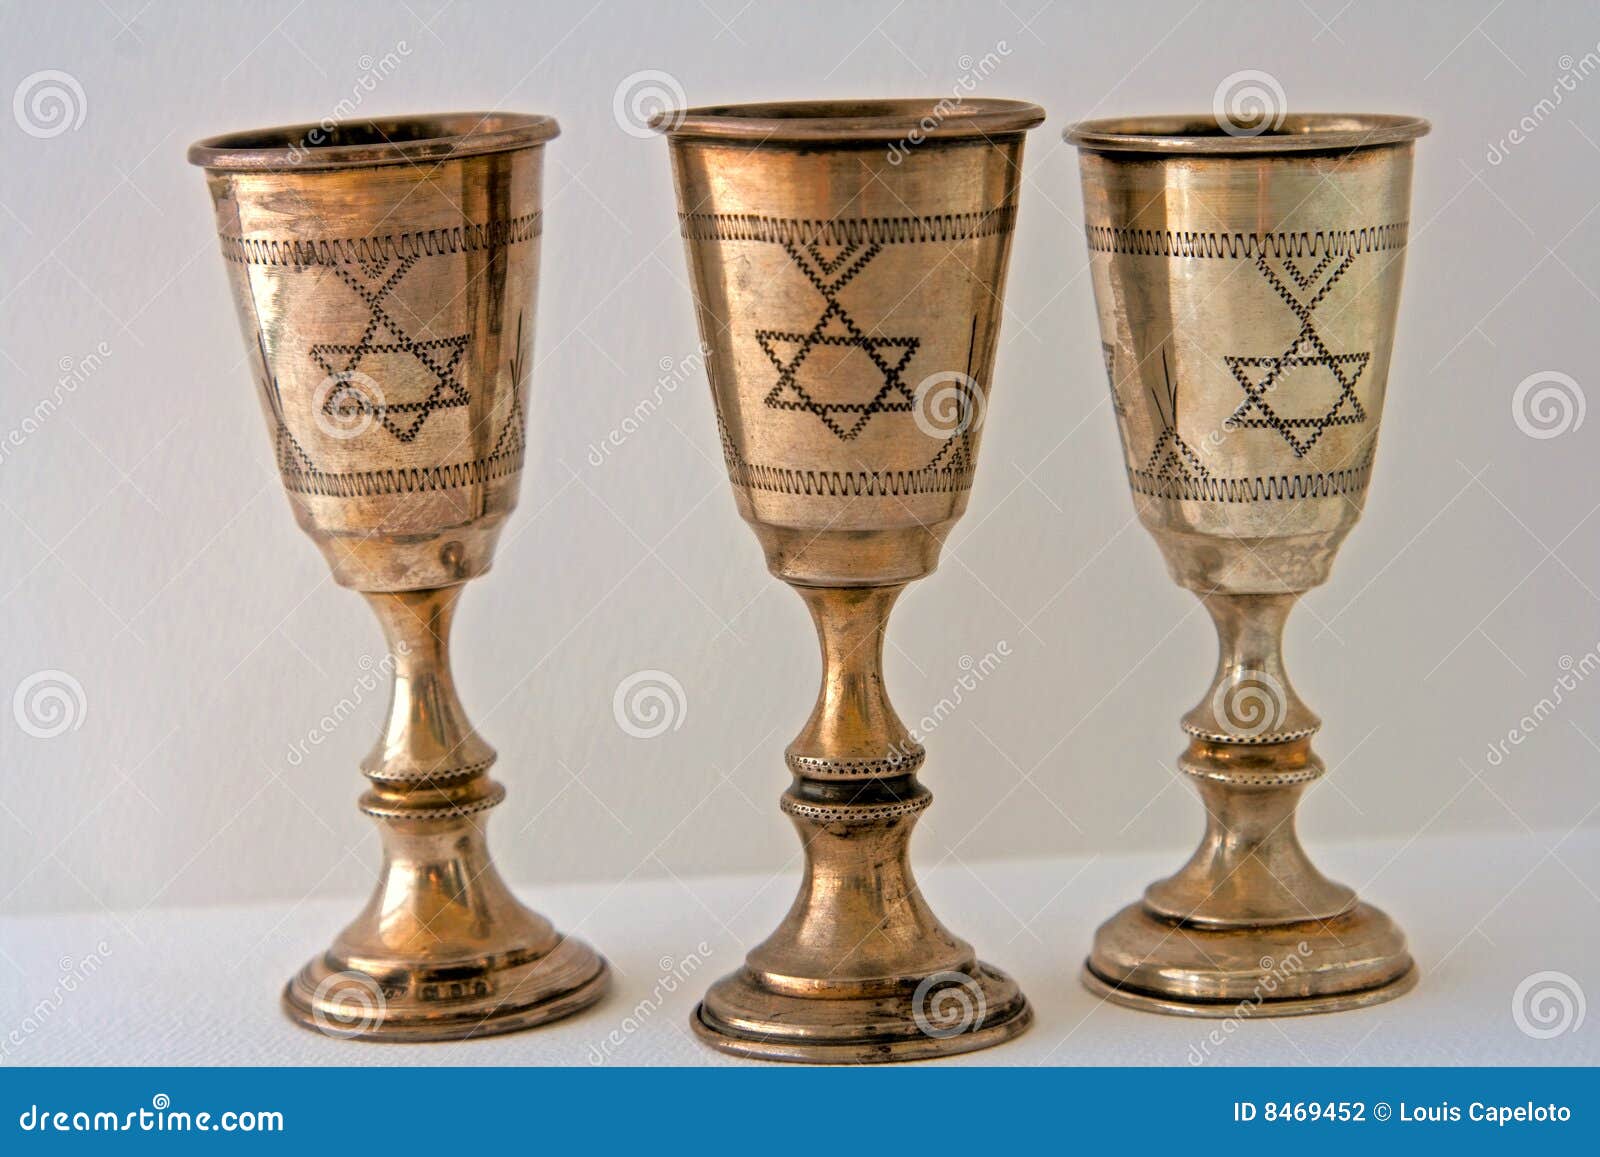 judaism and the holy cup of prayer